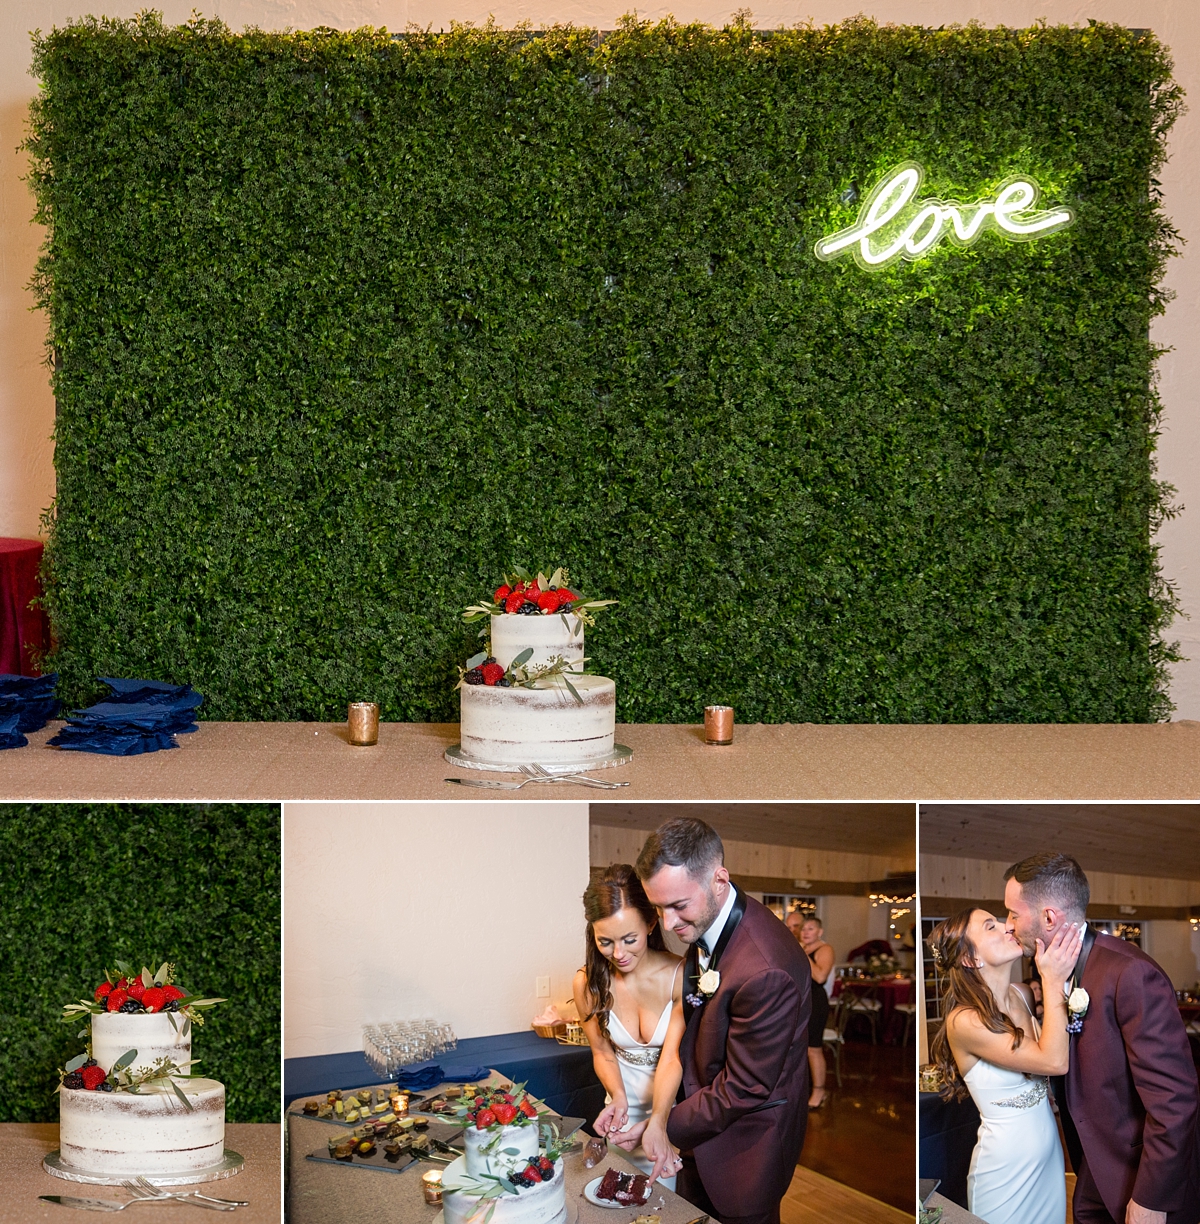 chantelle marie lakehouse and celebration venue, sarah heppell photography, whistlestop florist reception decor, mlh events reception decor, patisserie wedding cake, neon love sign, bride and groom cut cake at wedding reception 